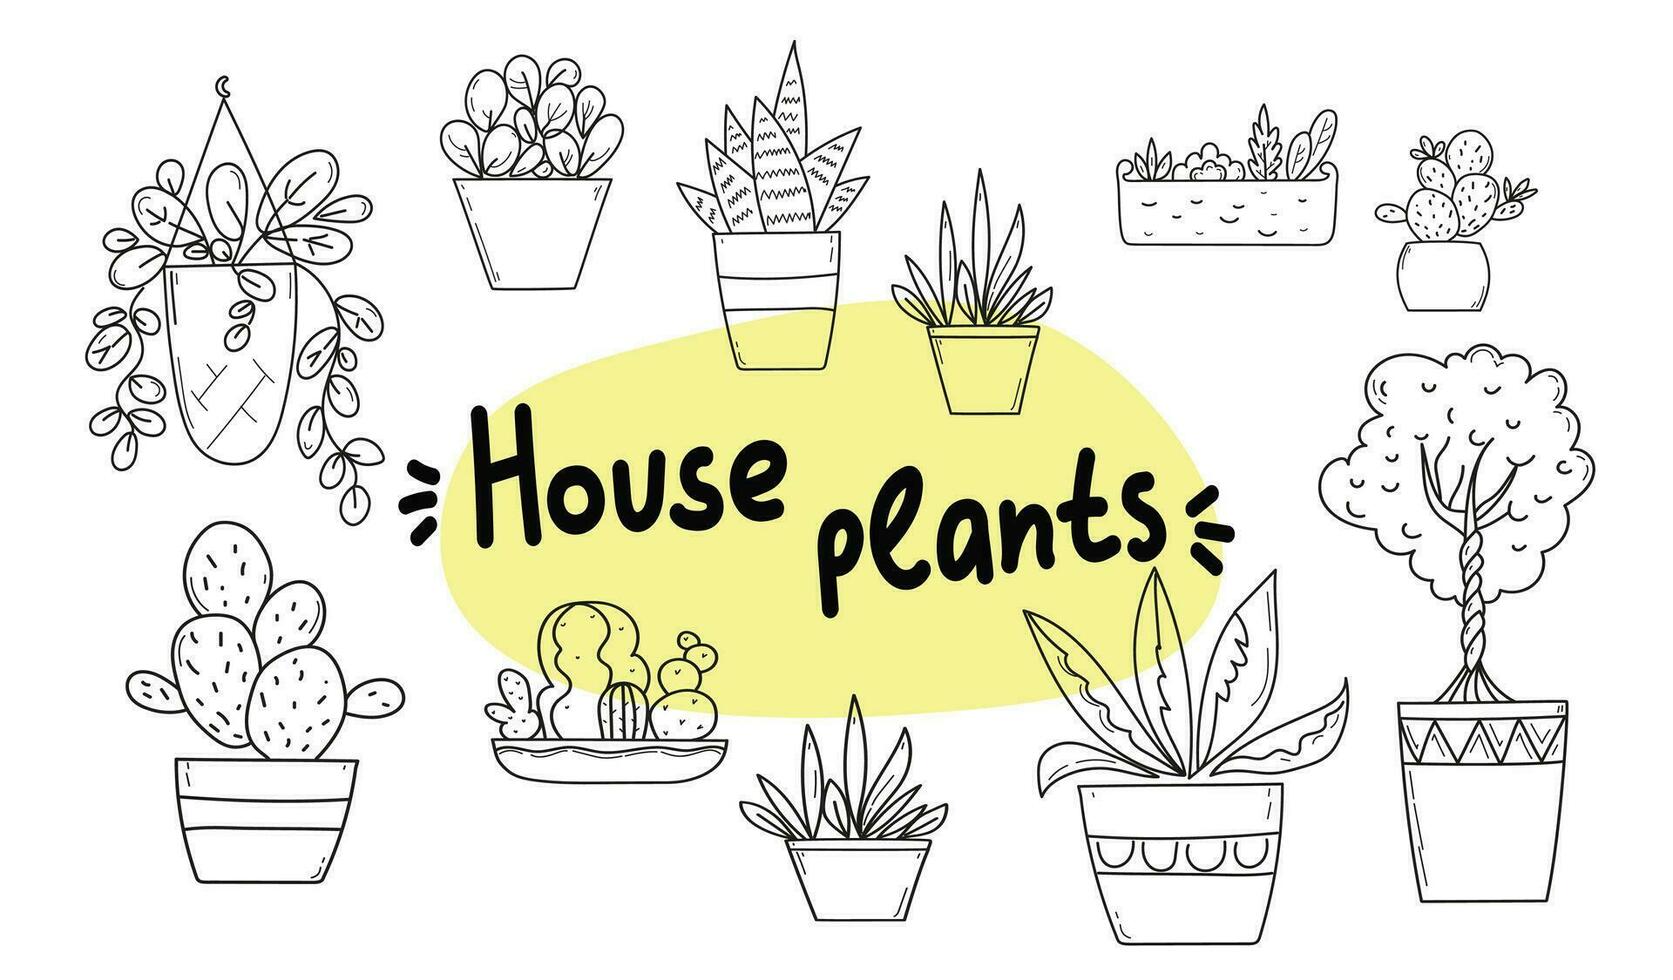 Home plants in a pot black and white contour doodle drawing set vector